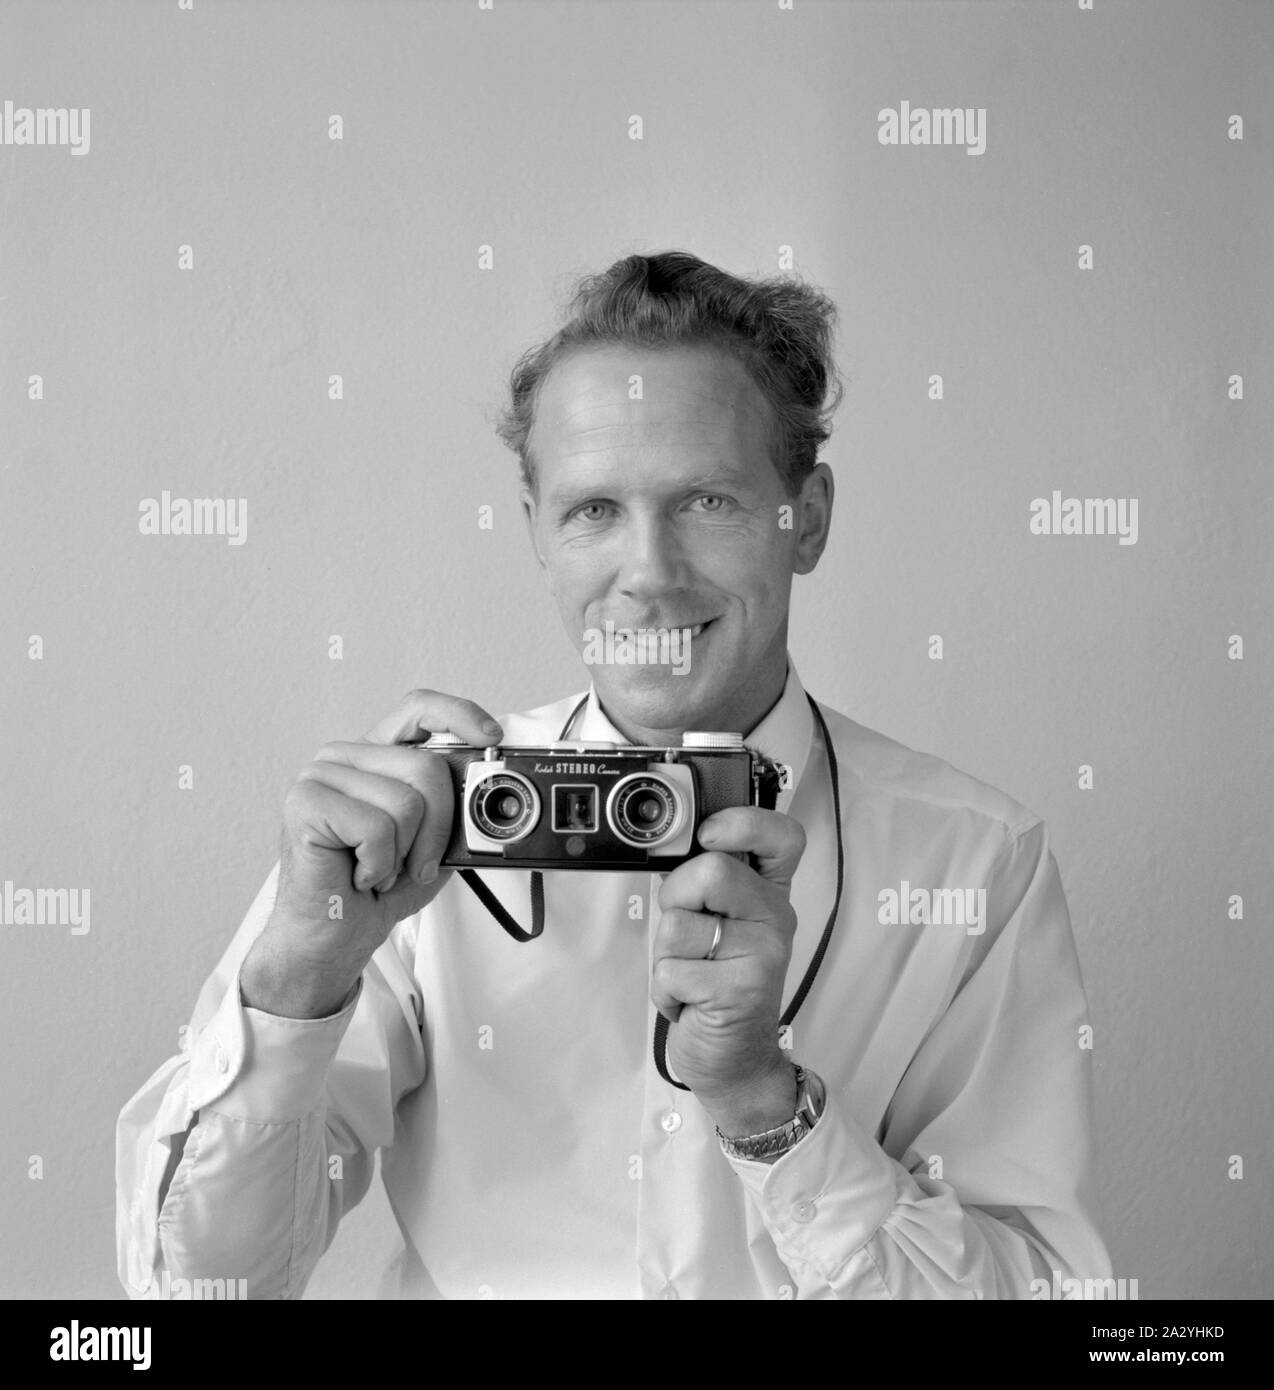 Camera history. A man with a Kodak Stereo Camera. A 35 mm stereo camera produced between 1954 och 1959. The camera took twin shots of the scene, and the slides could then be viewed in dedicated image viewers to experience the depth and effect of the twin lense photography. Sweden 1955 Stock Photo